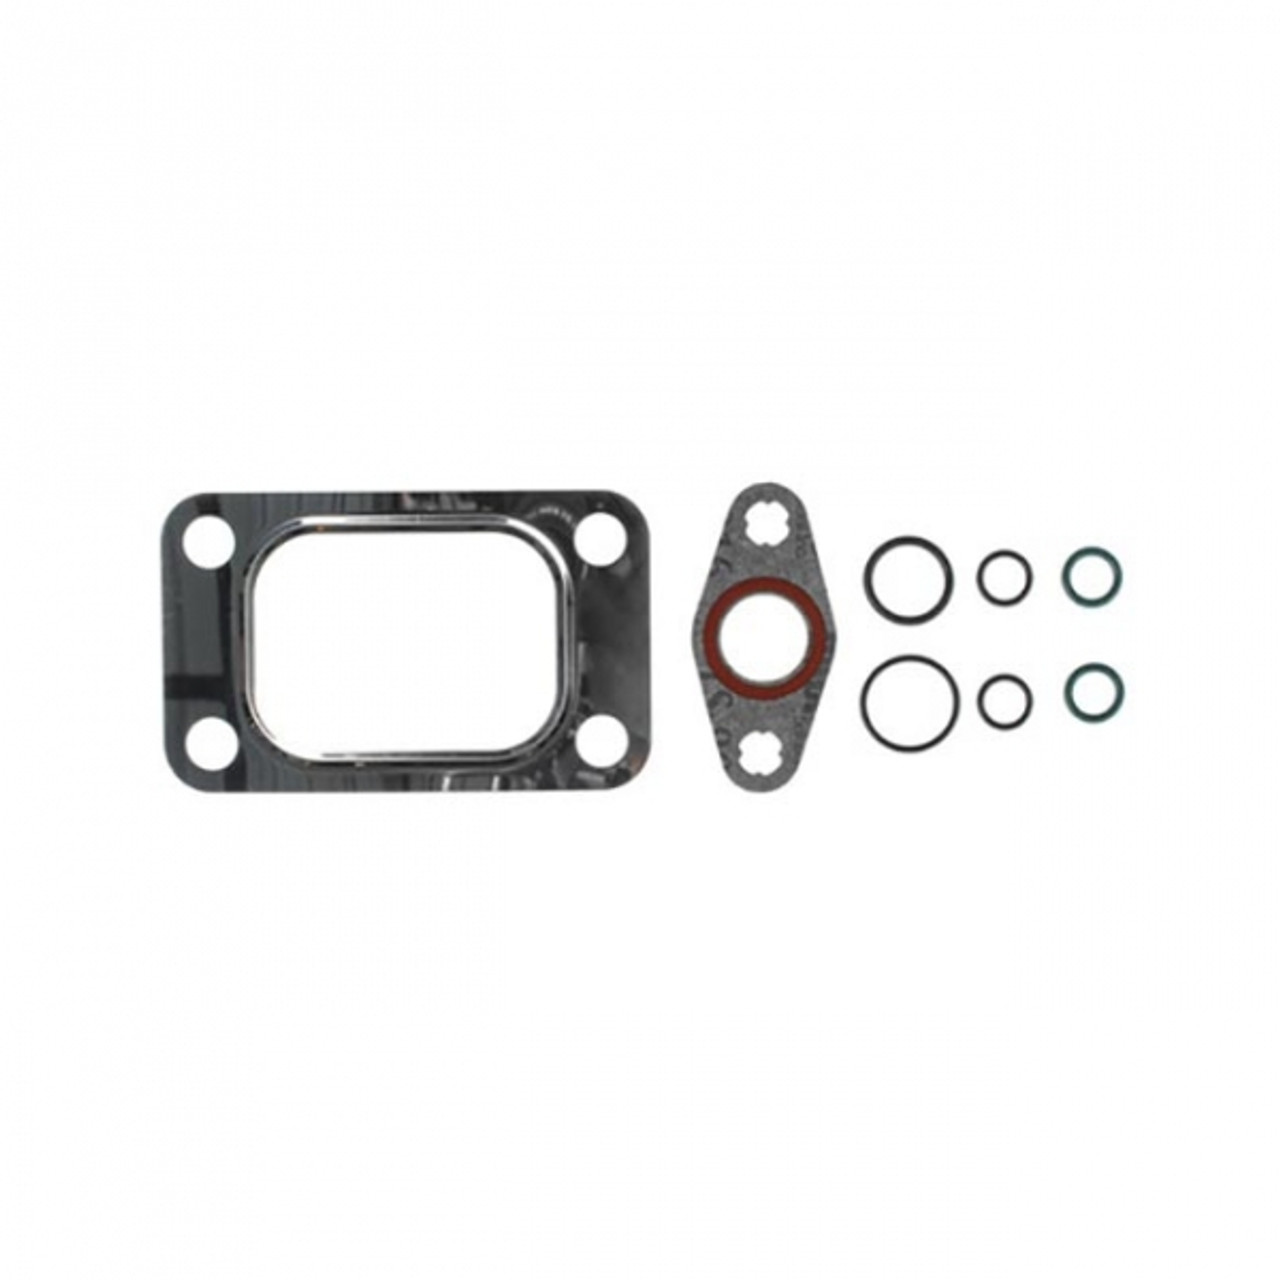 Mahle Turbocharger Mounting Gasket Set 2003 to 2007 5.9L Cummins (MCIGS33584)-Main View